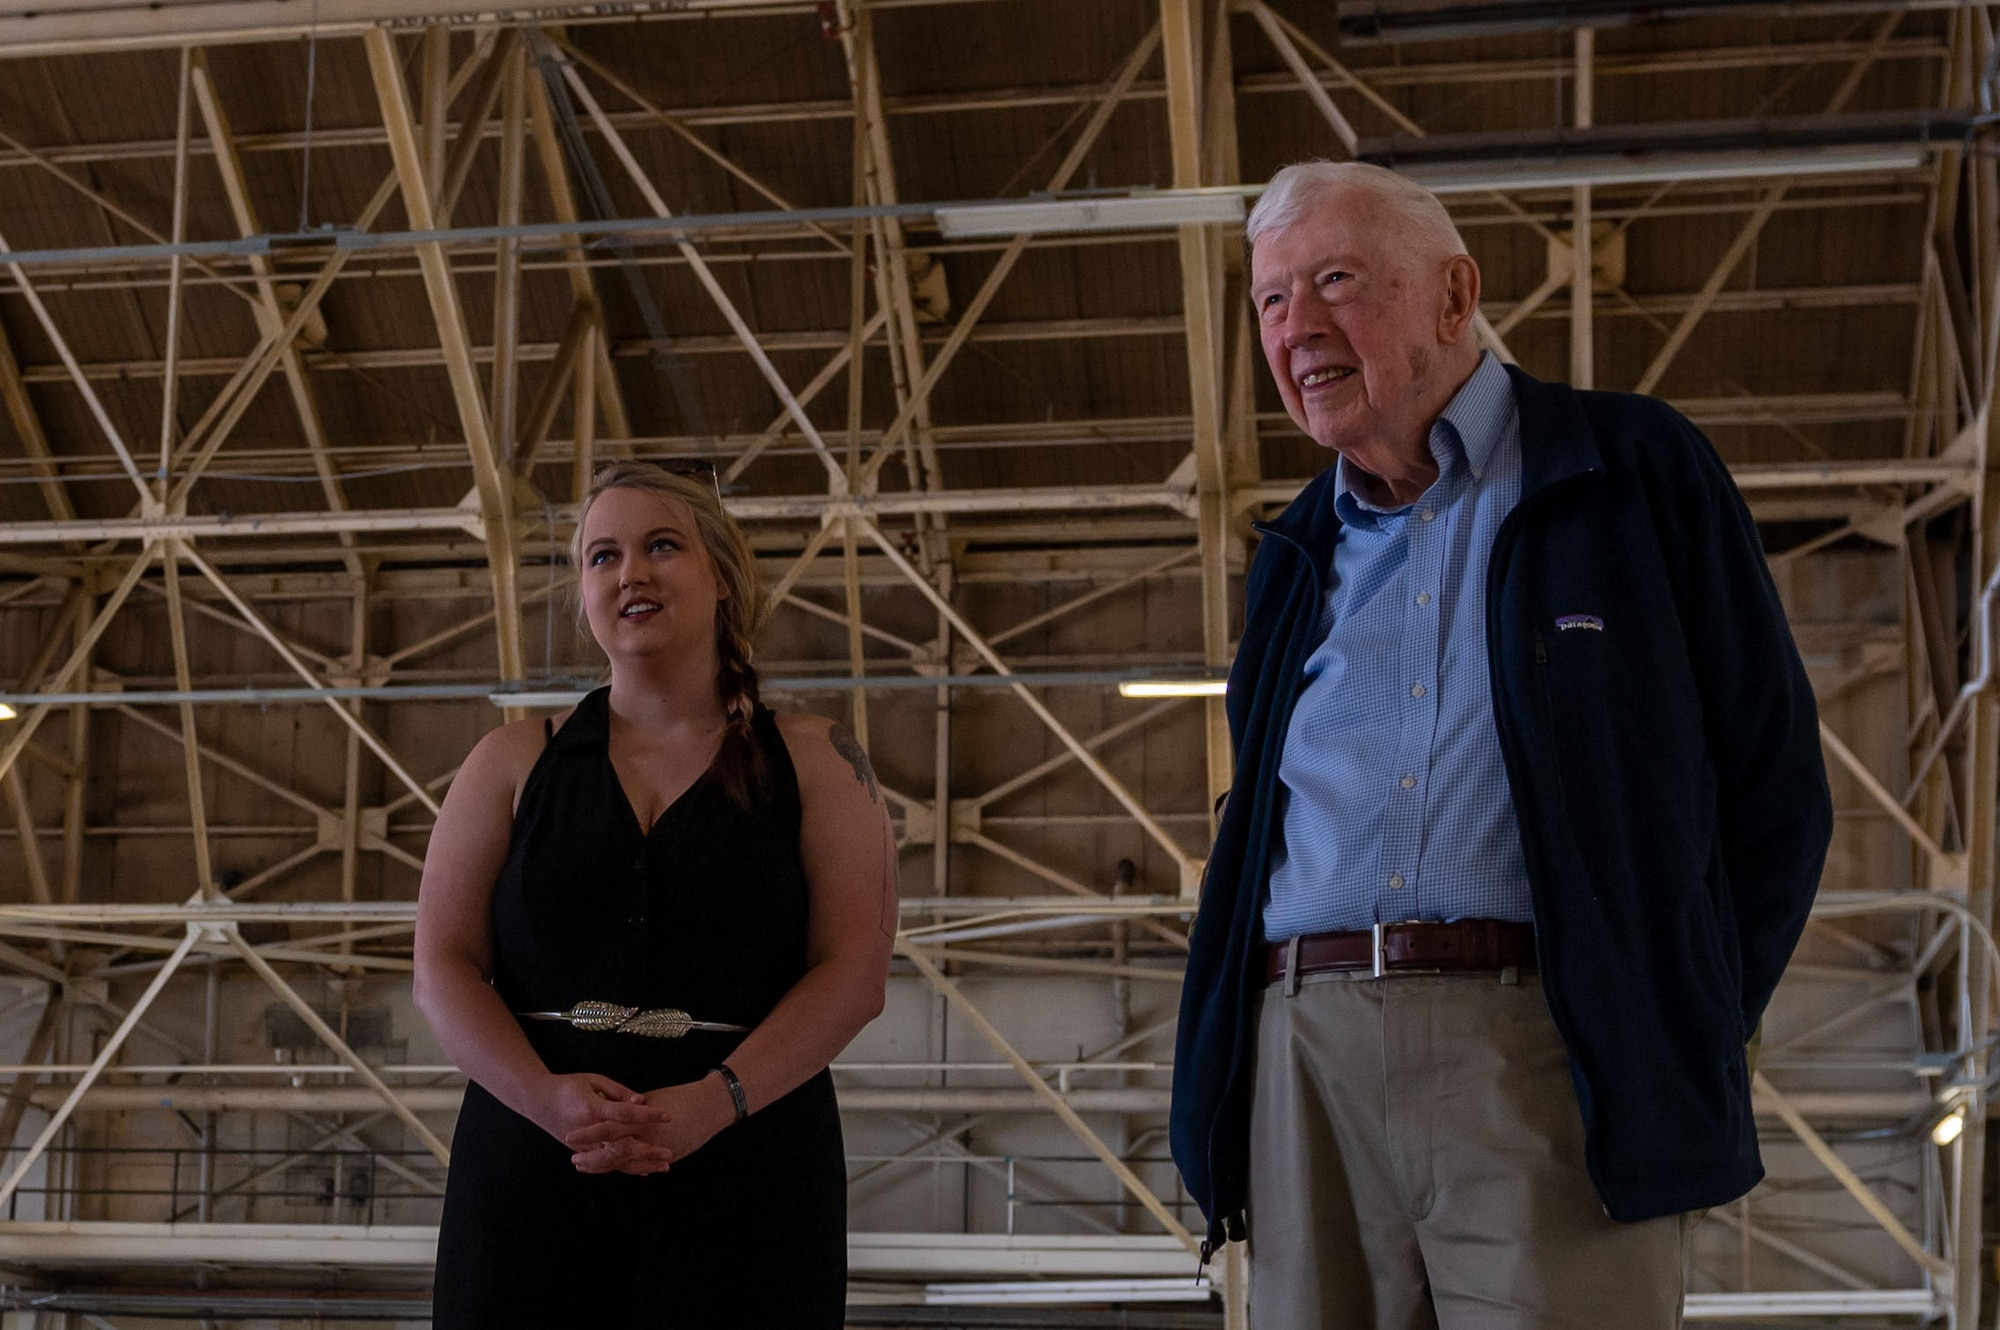 Retired Gen. John Shaud, former 92nd Bombardment wing commander, tours Fairchild's oldest aircraft hangar at Fairchild Air Force Base, Washington, August 22, 2022. The hanger has been renovated, but the original frame remains untouched. (U.S. Air Force photo by Airman 1st Class Morgan Dailey)